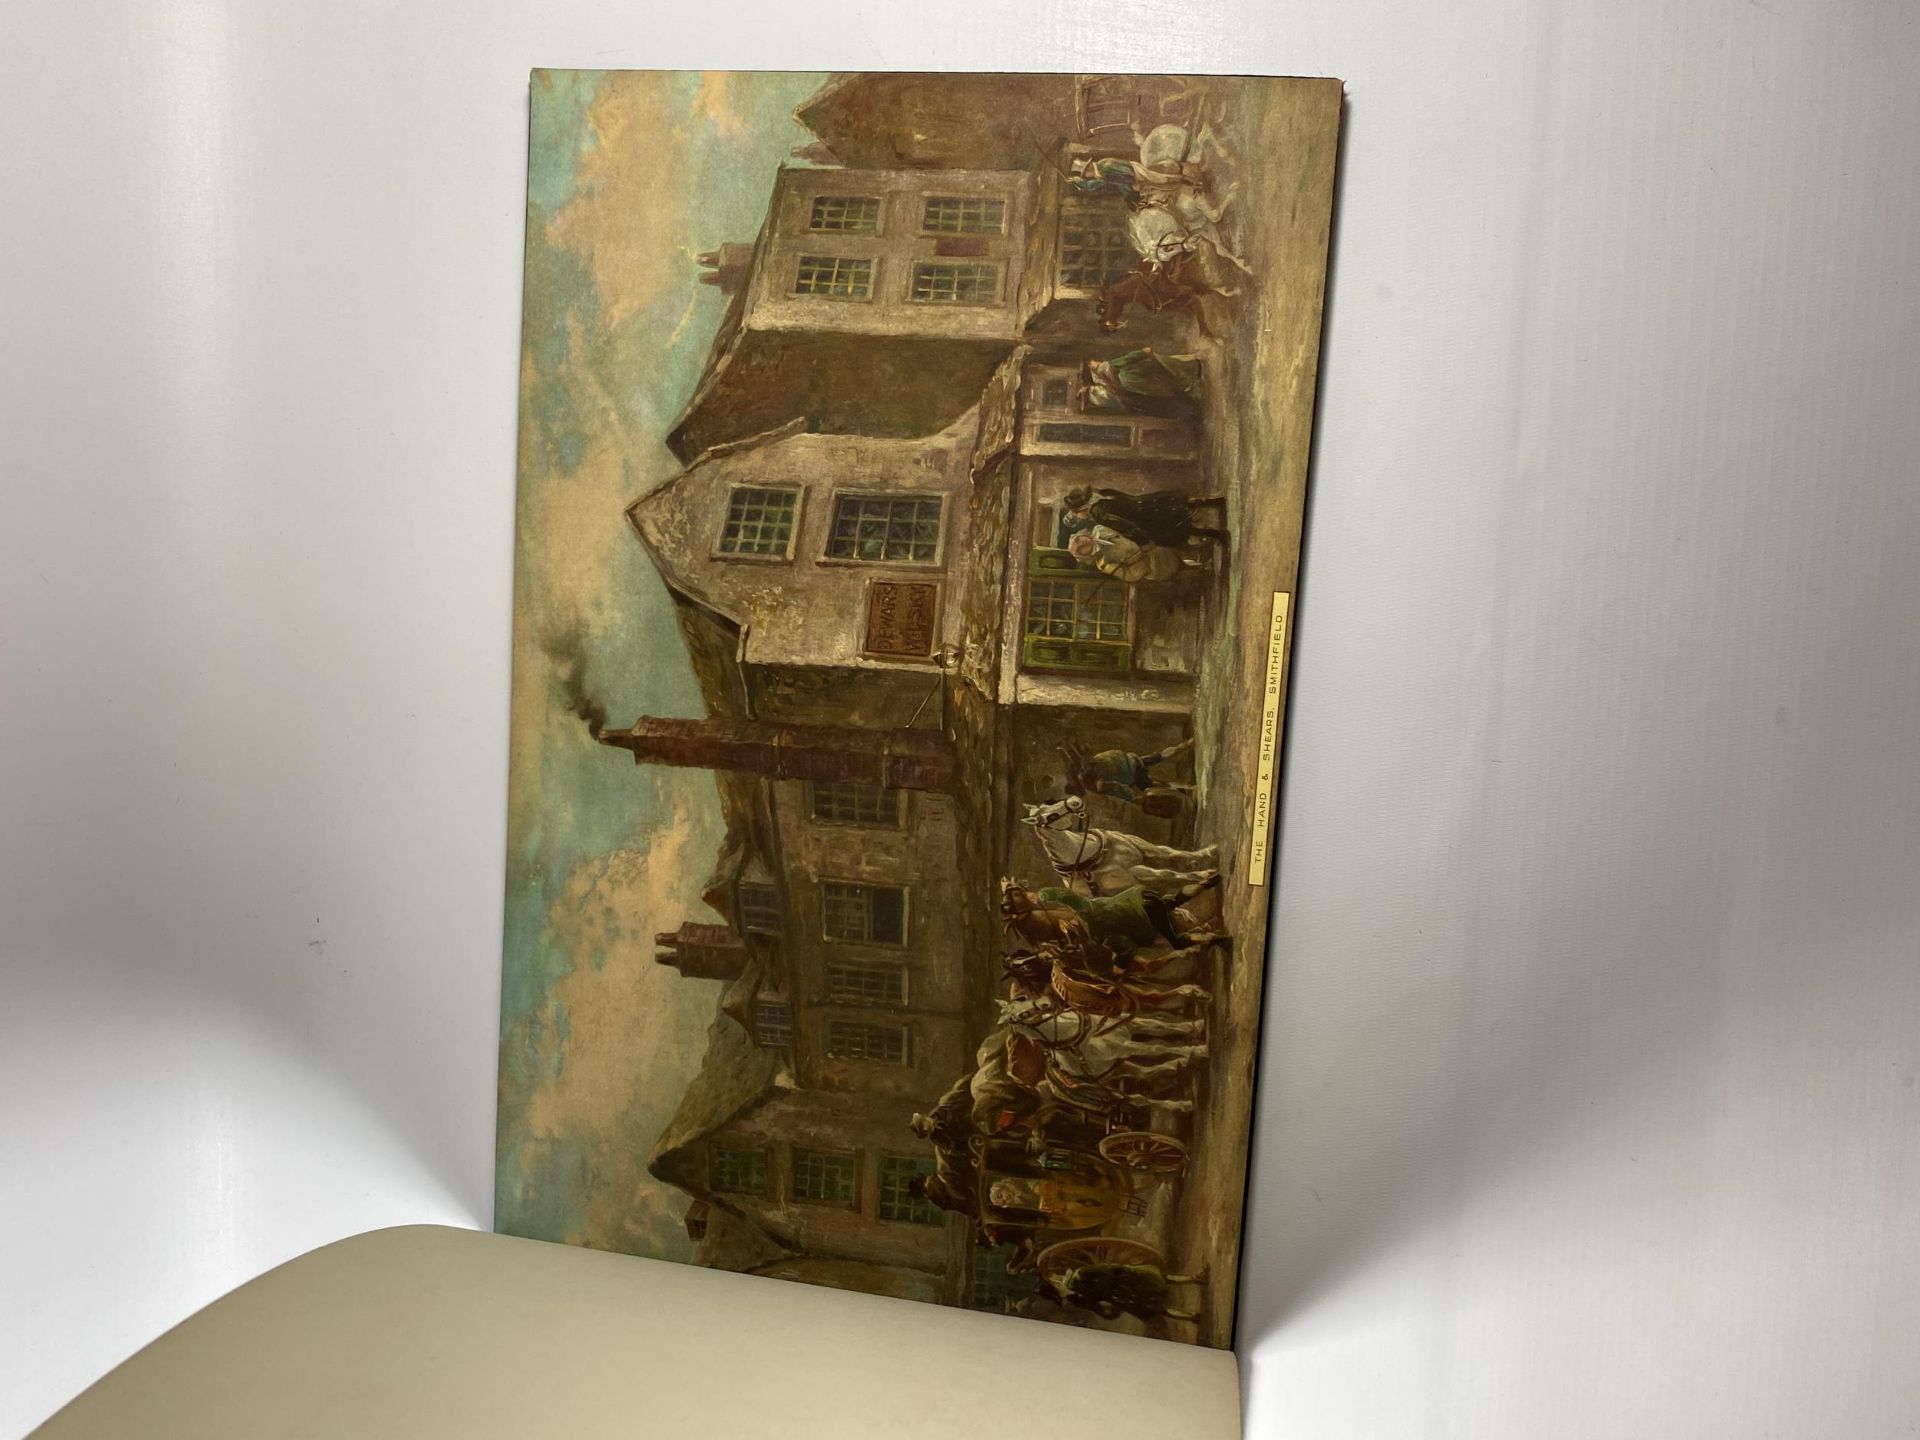 A RARE TOME OLD ENGLISH COACHING INNS MINT - COLLECTION OF LORD DEWAR - Image 3 of 4